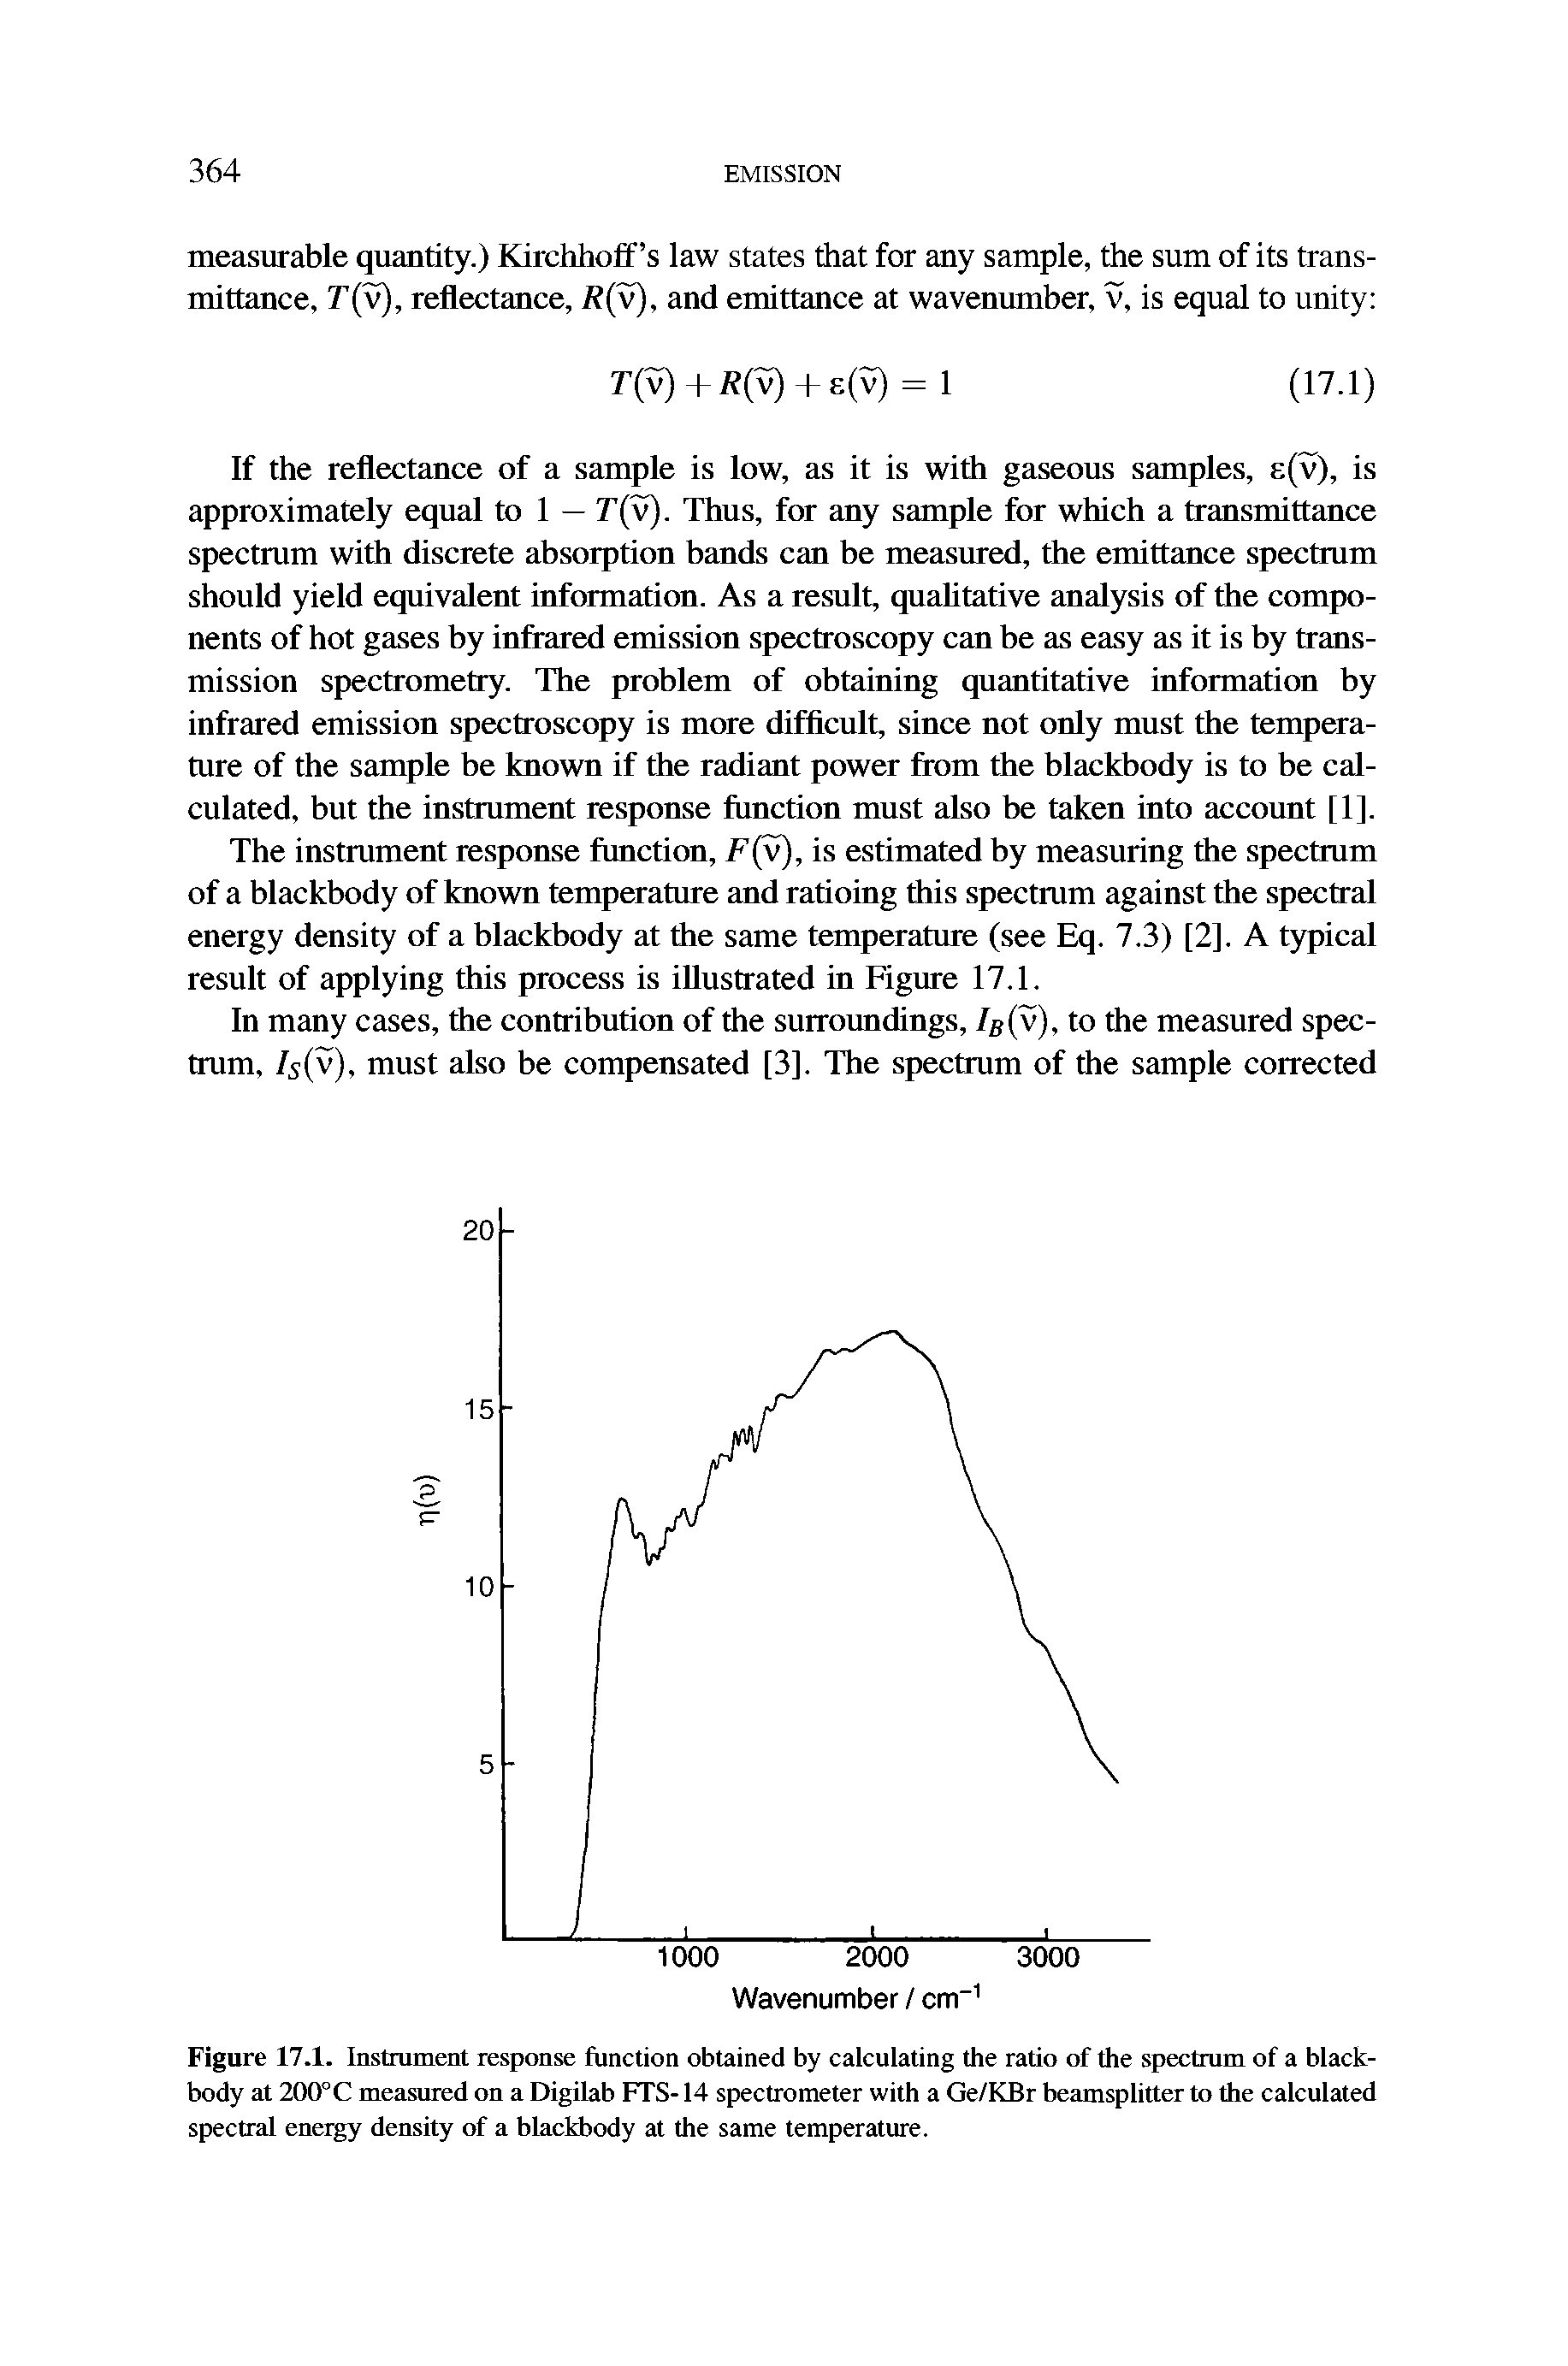 Figure 17.1. Instiument response function obtained by calculating the ratio of the spectrum of a blackbody at 200 C measured on a Digilab FTS-14 spectrometer with a Ge/KBr beamsplitter to the calculated spectral energy density of a blackbody at the same temperature.